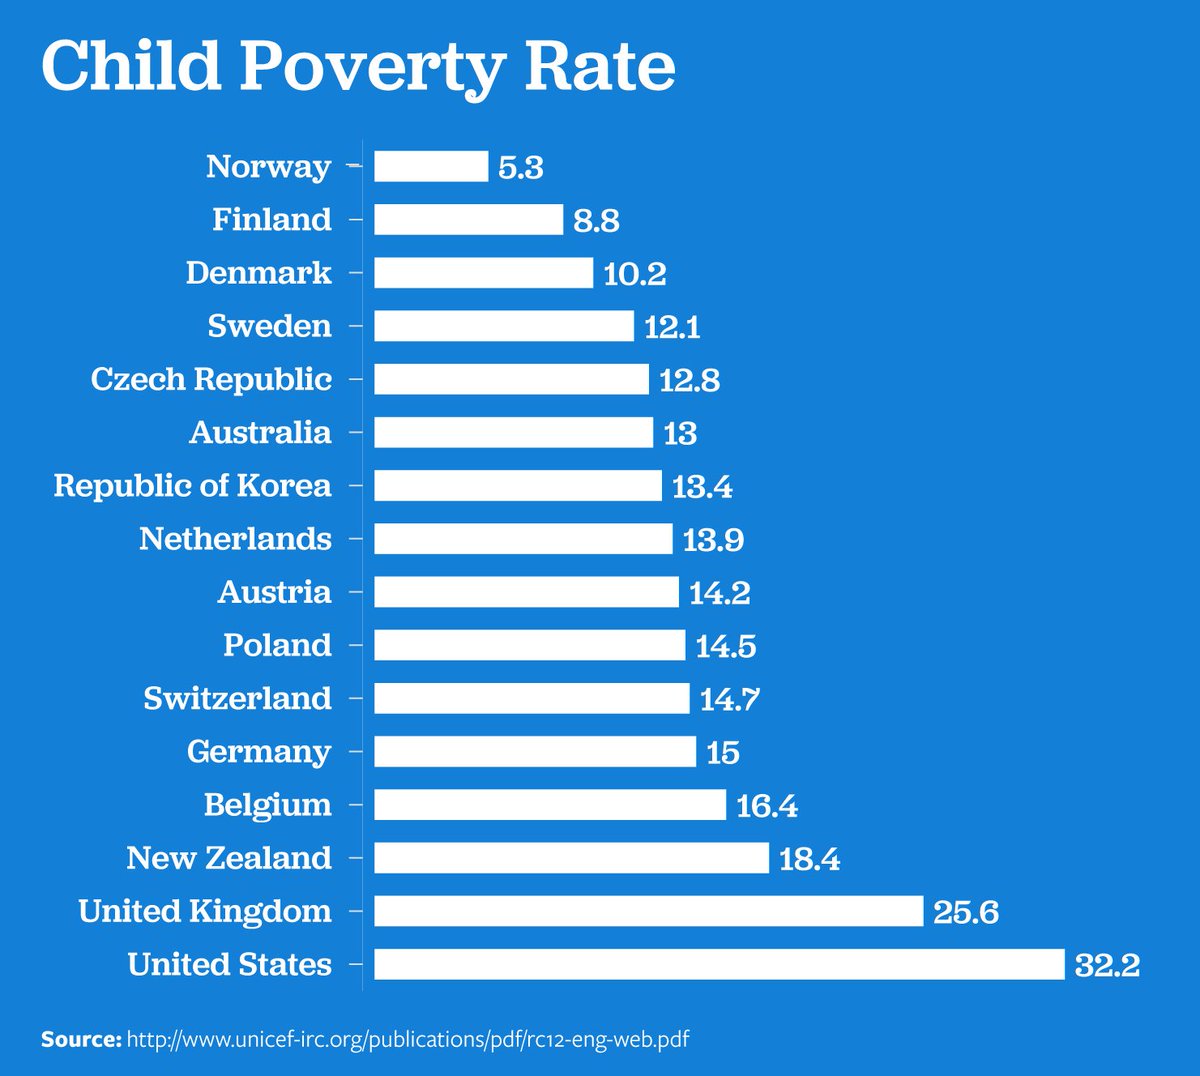 RT @BernieSanders: Today, shamefully, the United States has the highest childhood poverty rate of nearly any major country on earth. https:…